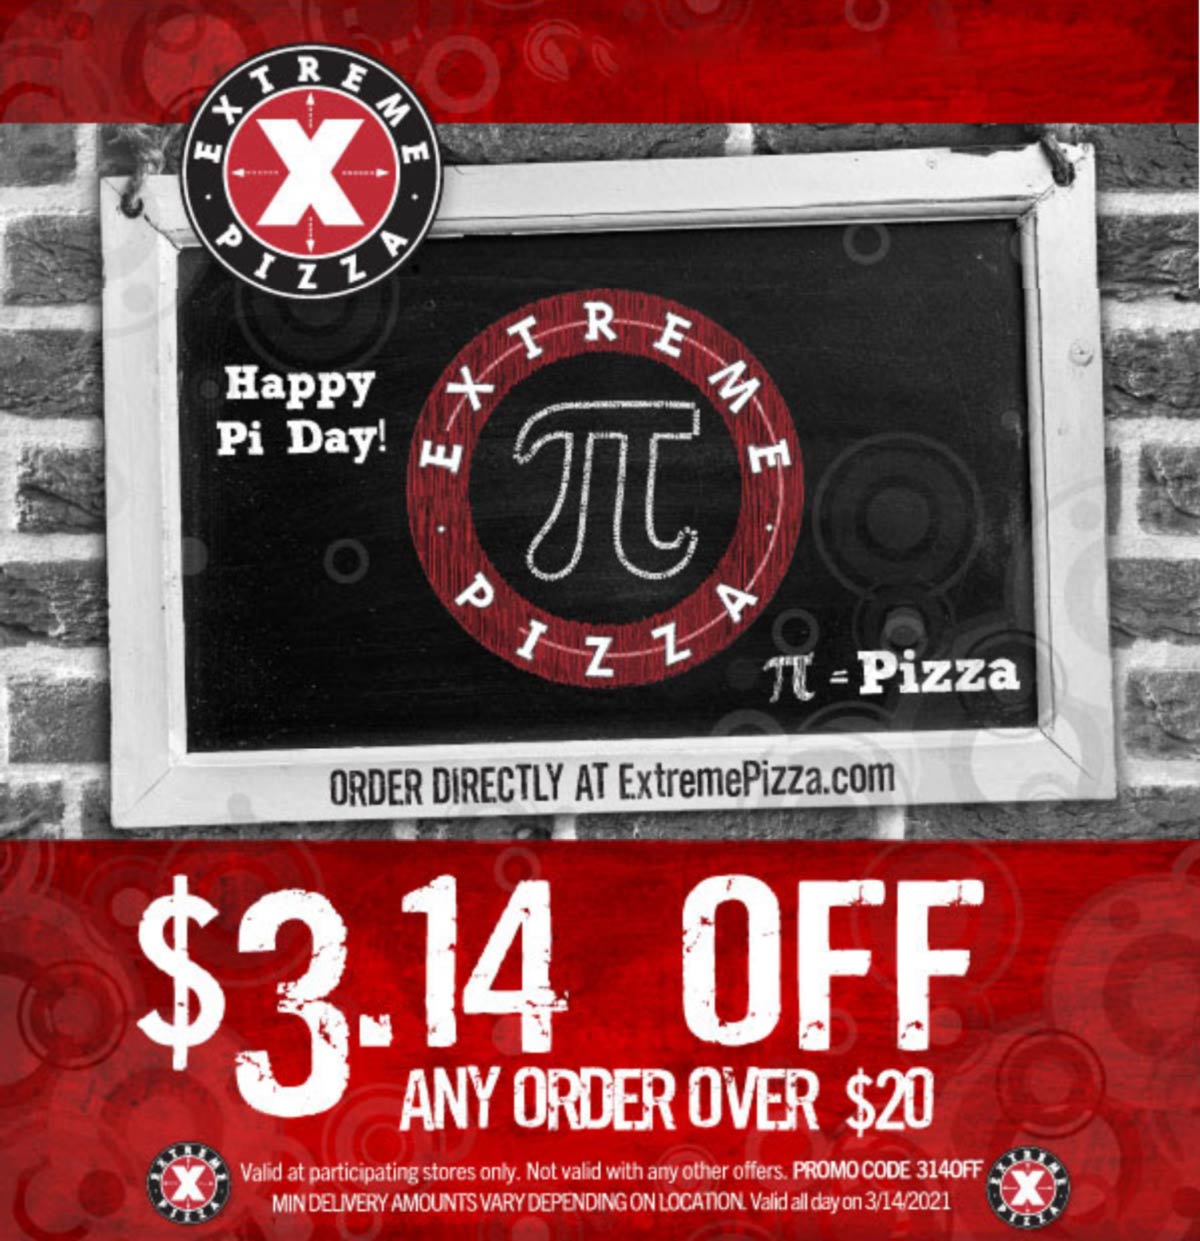 Extreme Pizza restaurants Coupon  $3.14 off $20 today at Extreme Pizza via promo code 314OFF #extremepizza 